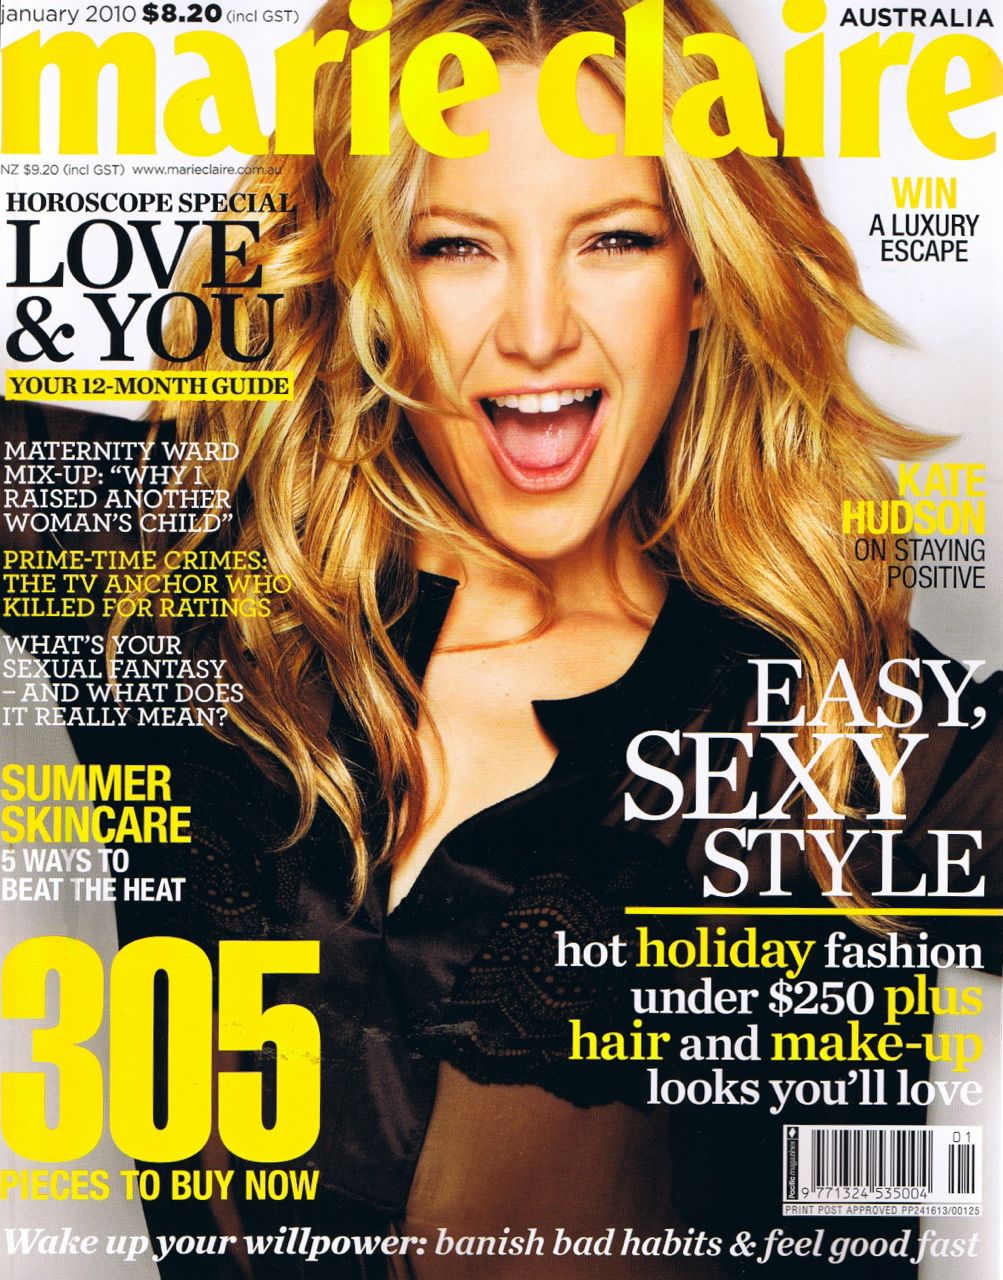 Covers of Marie Claire Australia with Kate Hudson, 000 2010 | Magazines ...